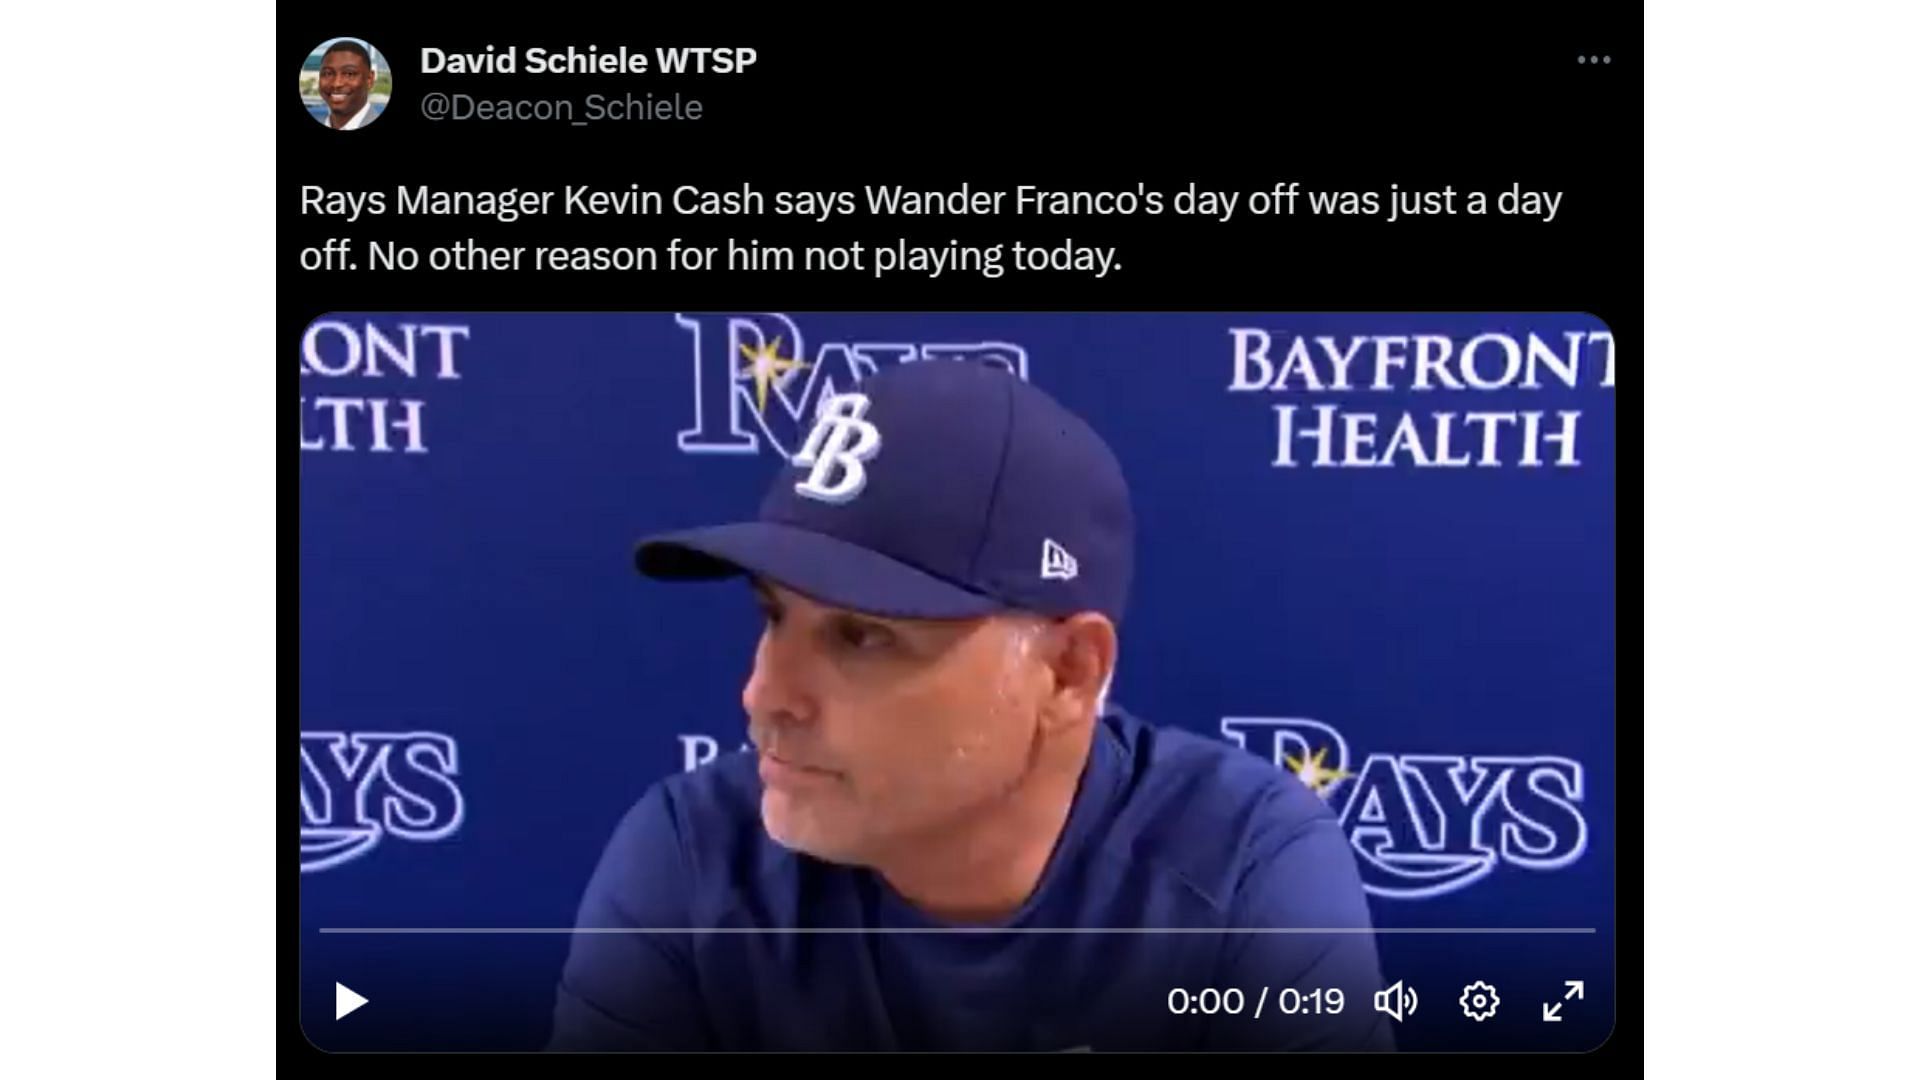 Rays Manager Kevin Cash speaks on the situation